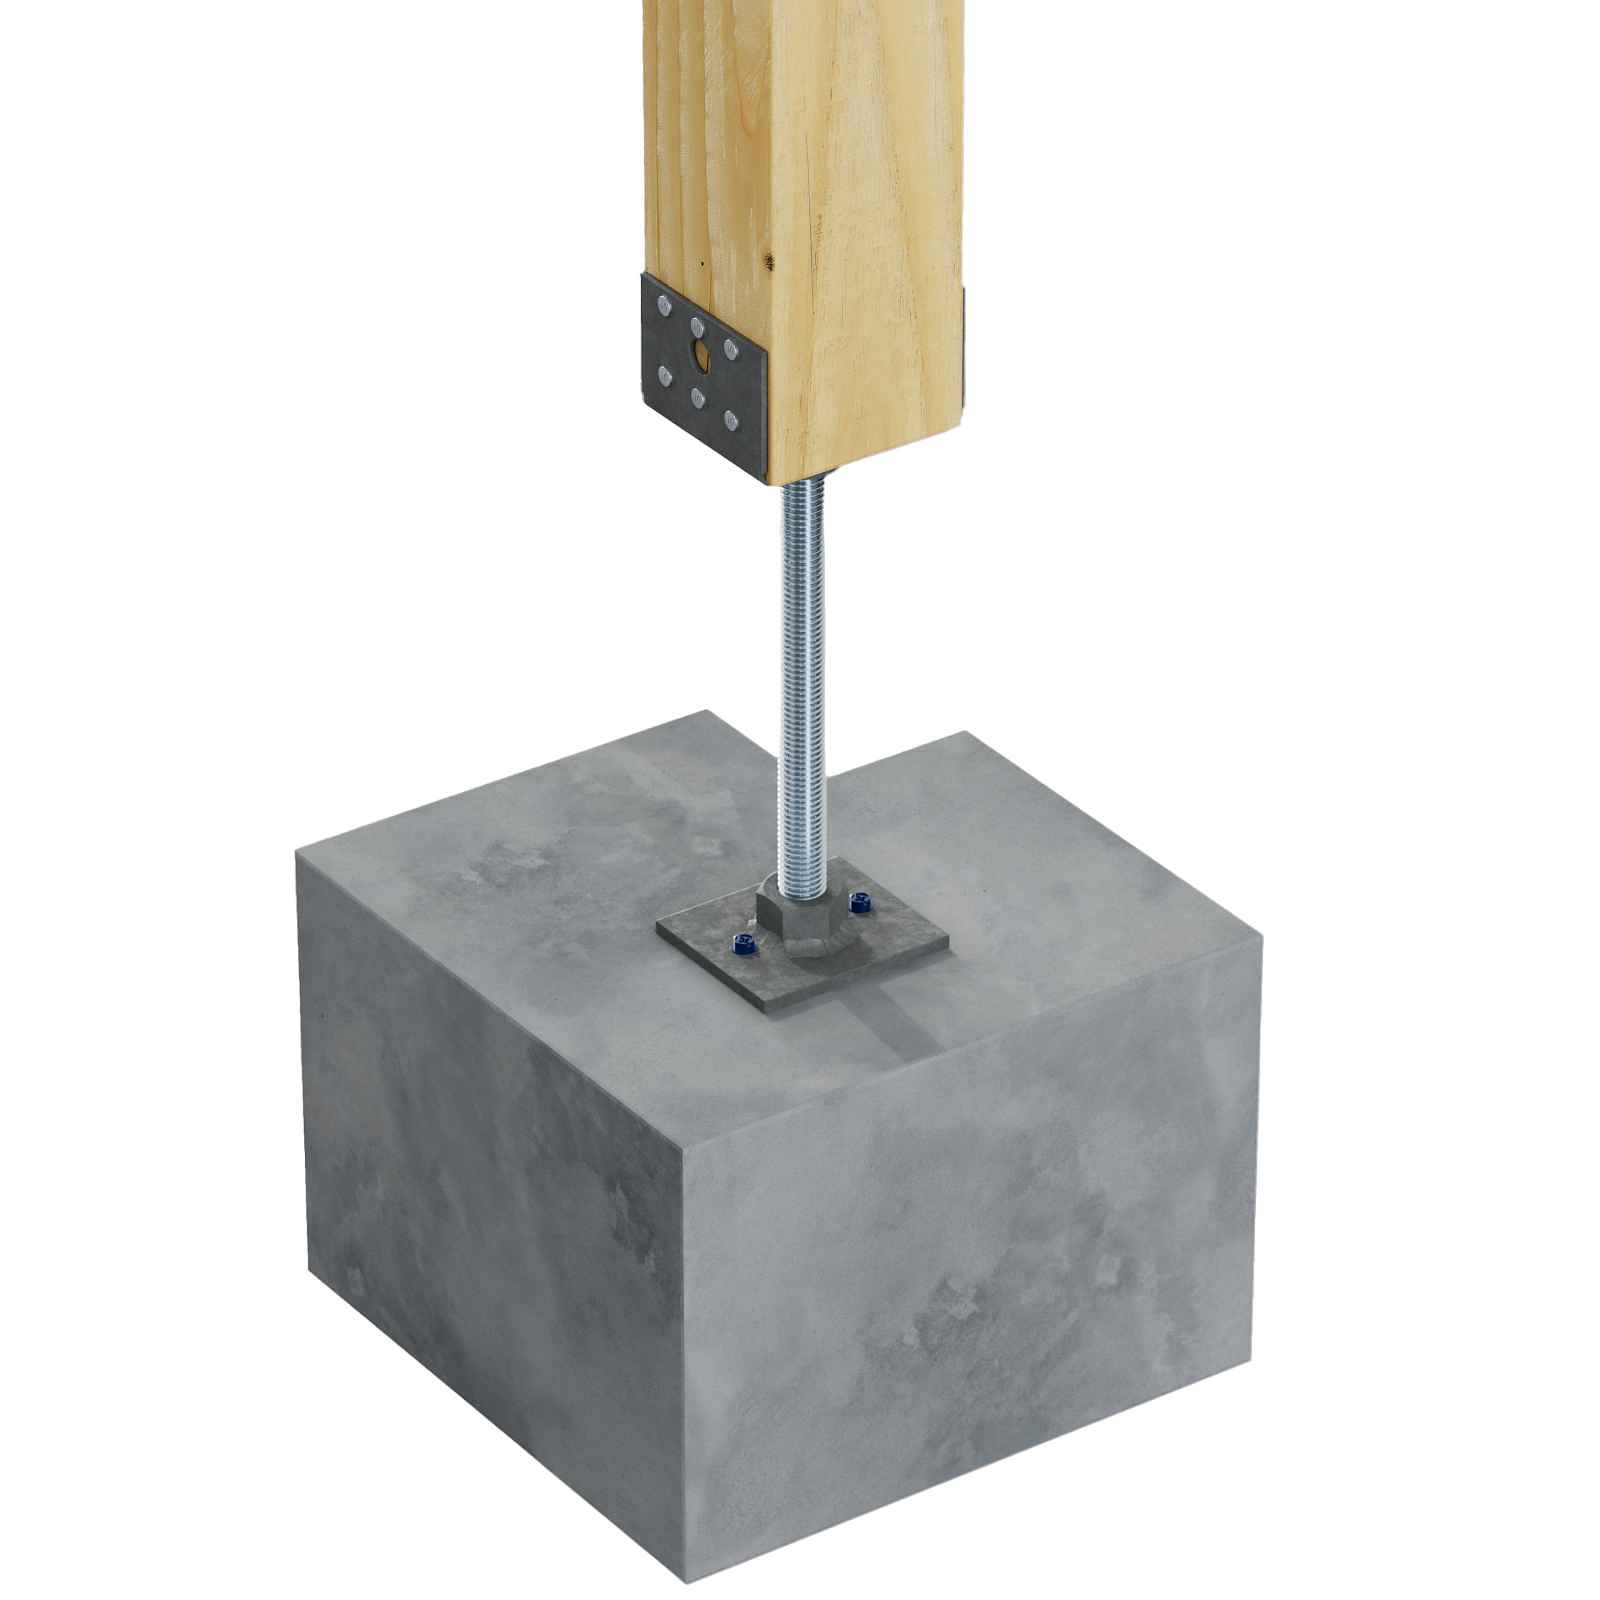 Simpson PPBF44 4x4 Adjustable Porch Post Base- Gray Painted